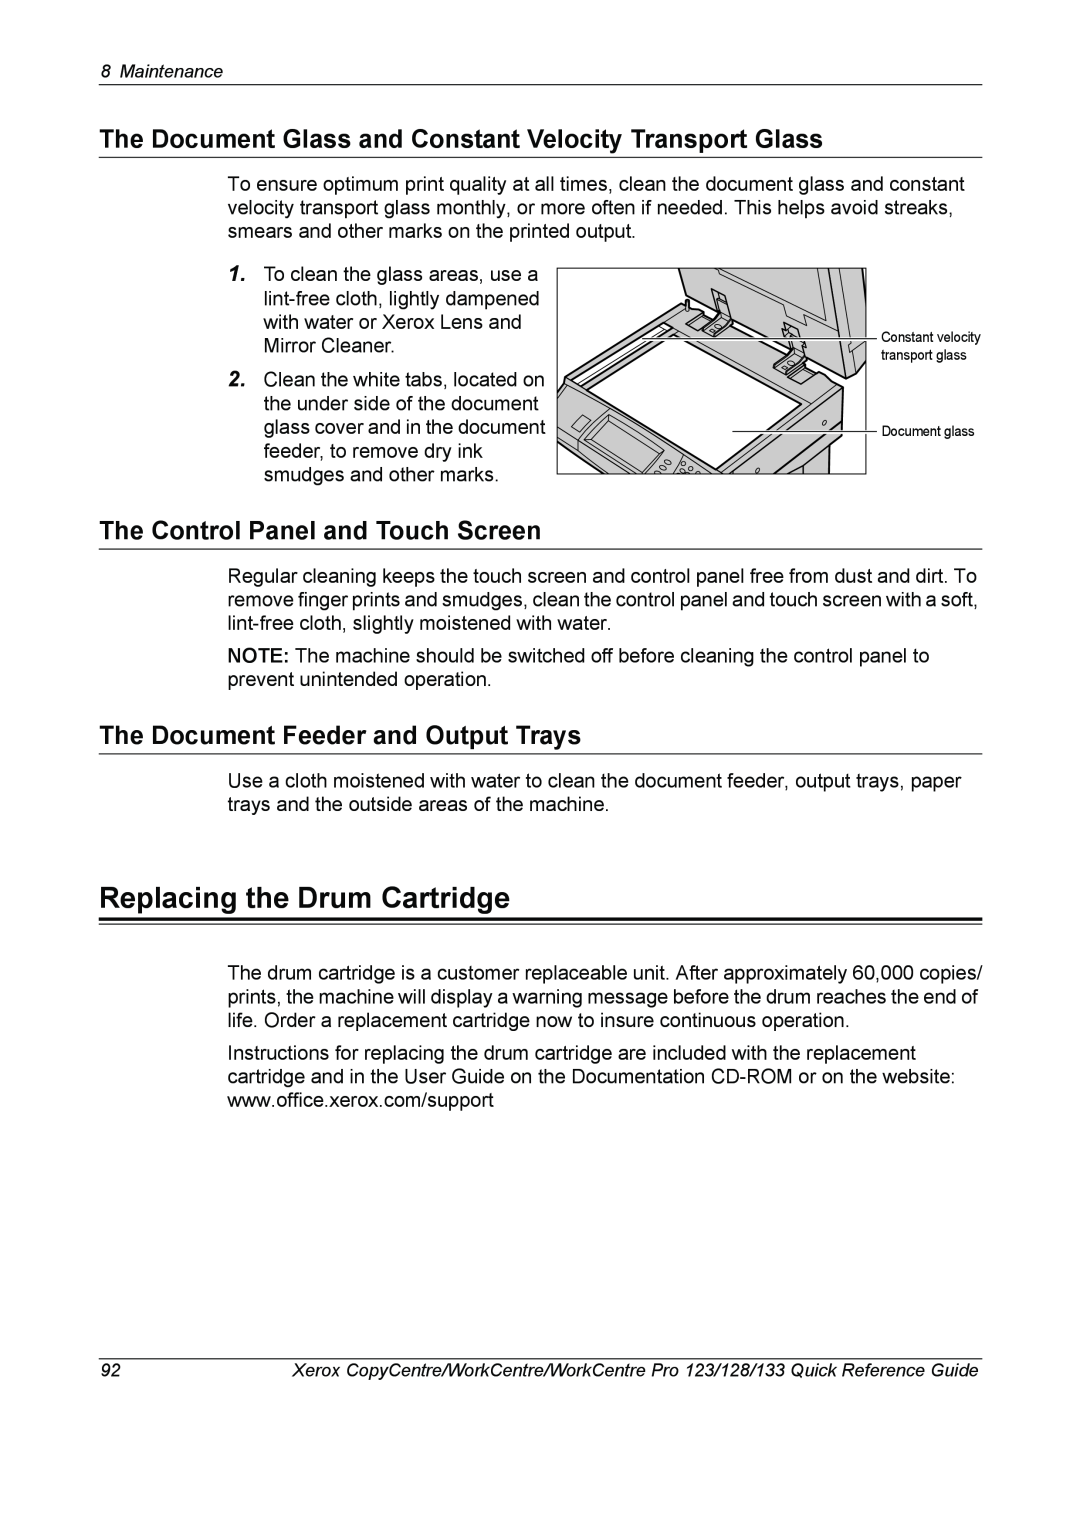 Xerox 604P18037 manual Replacing the Drum Cartridge, The Document Glass and Constant Velocity Transport Glass 